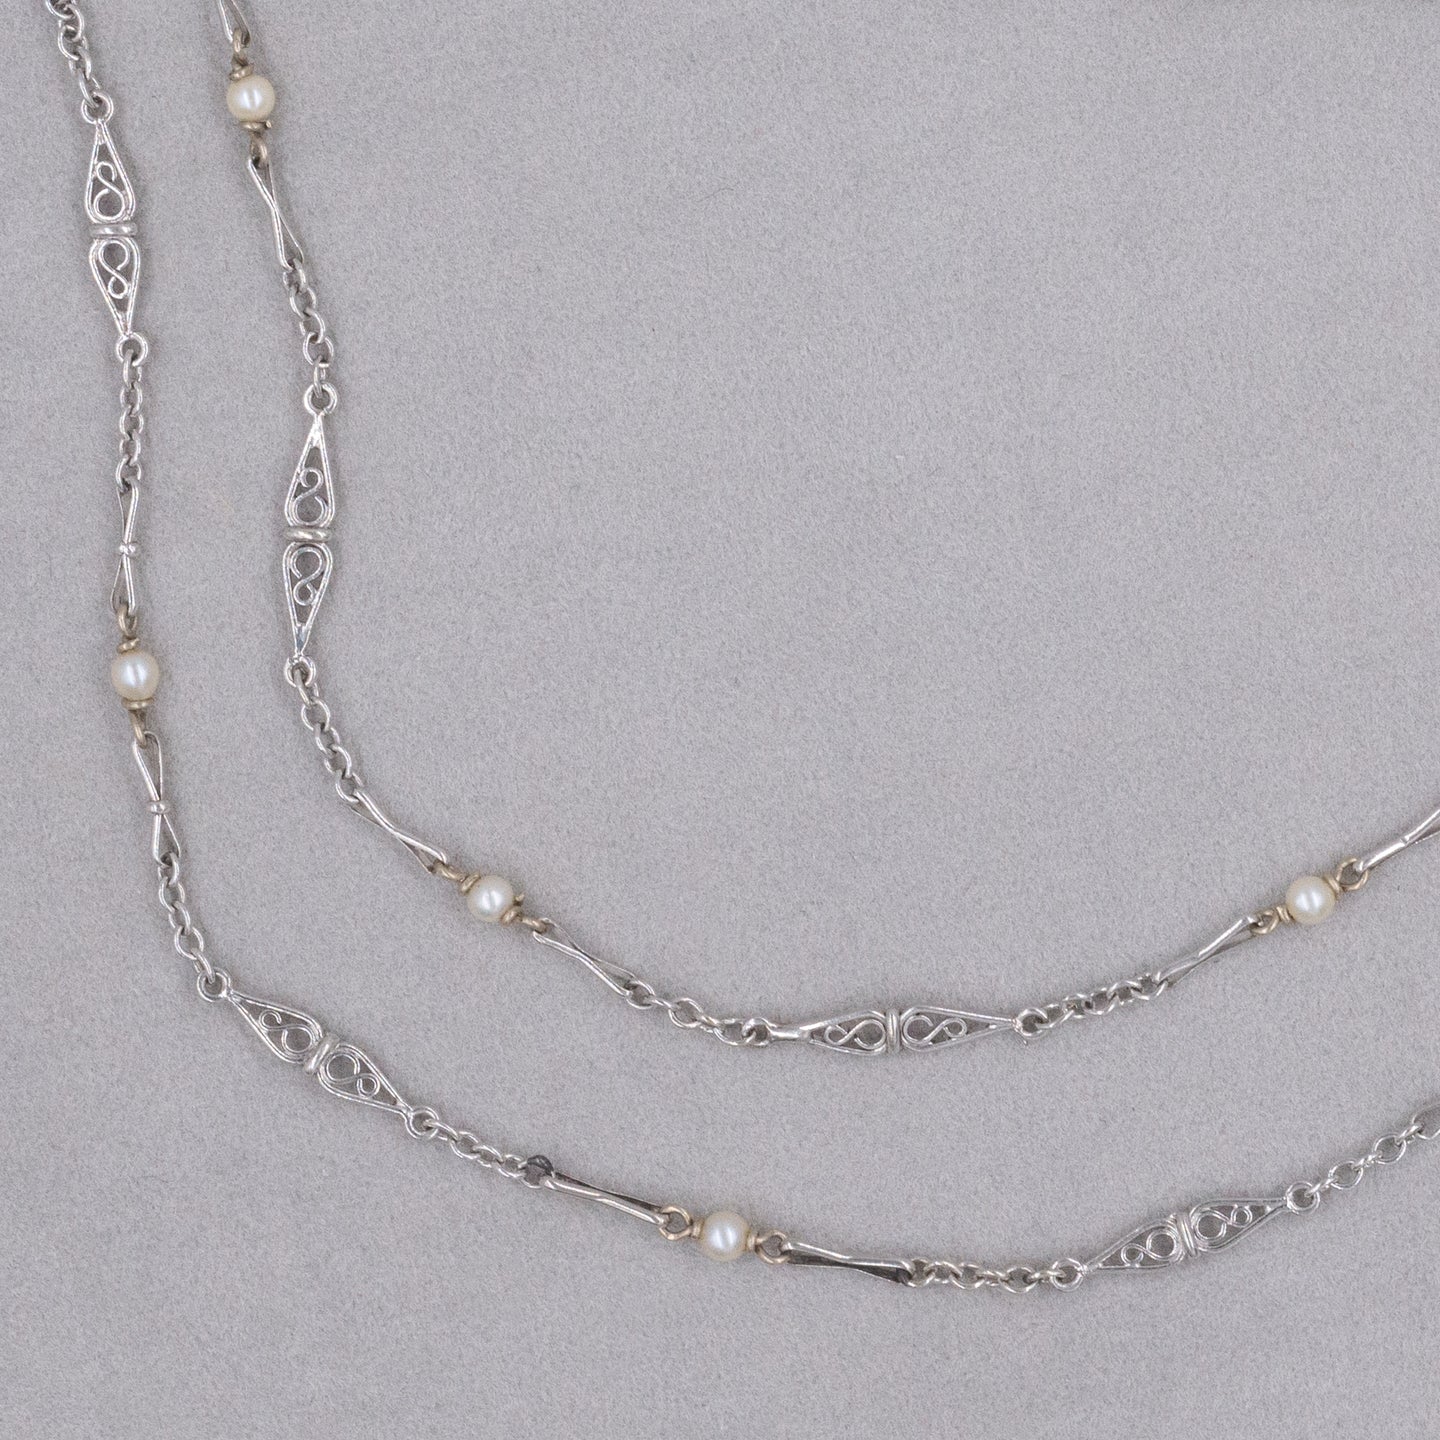 Filigree Chain and Pearl Necklace c1920